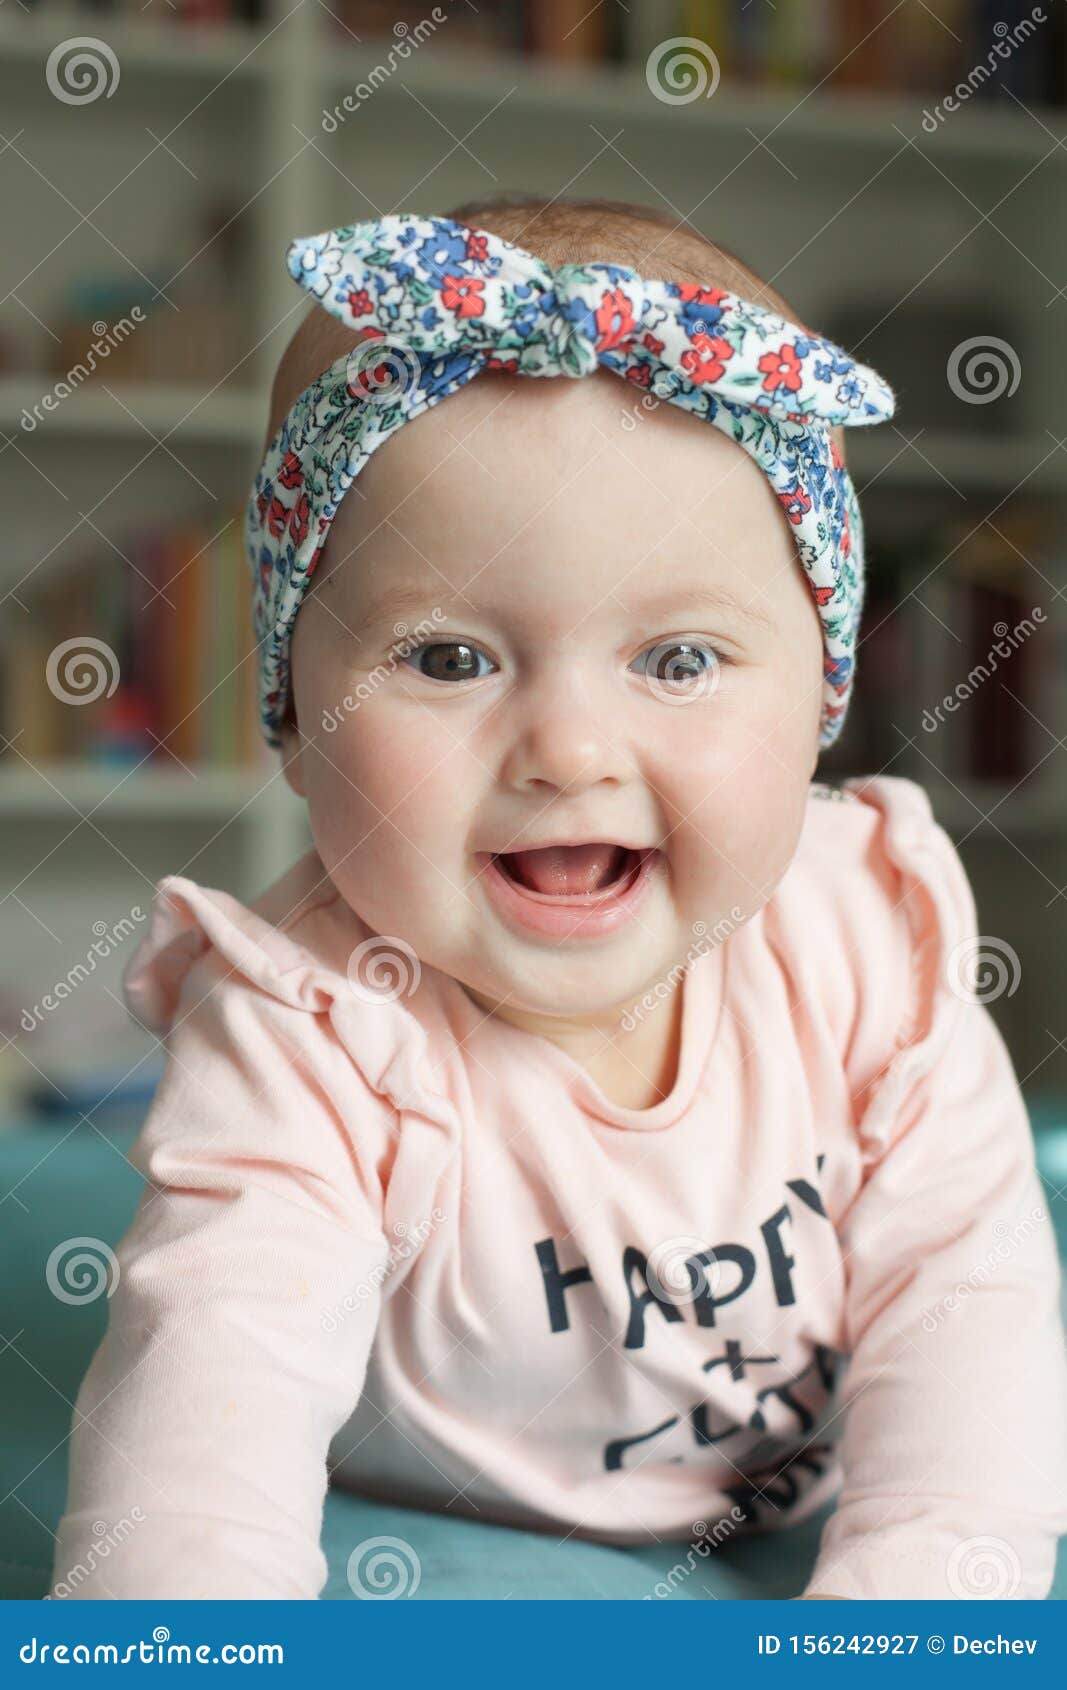 Cute Baby Girl with Hairband Ribbon, Smiling, Laughing. Adorable ...